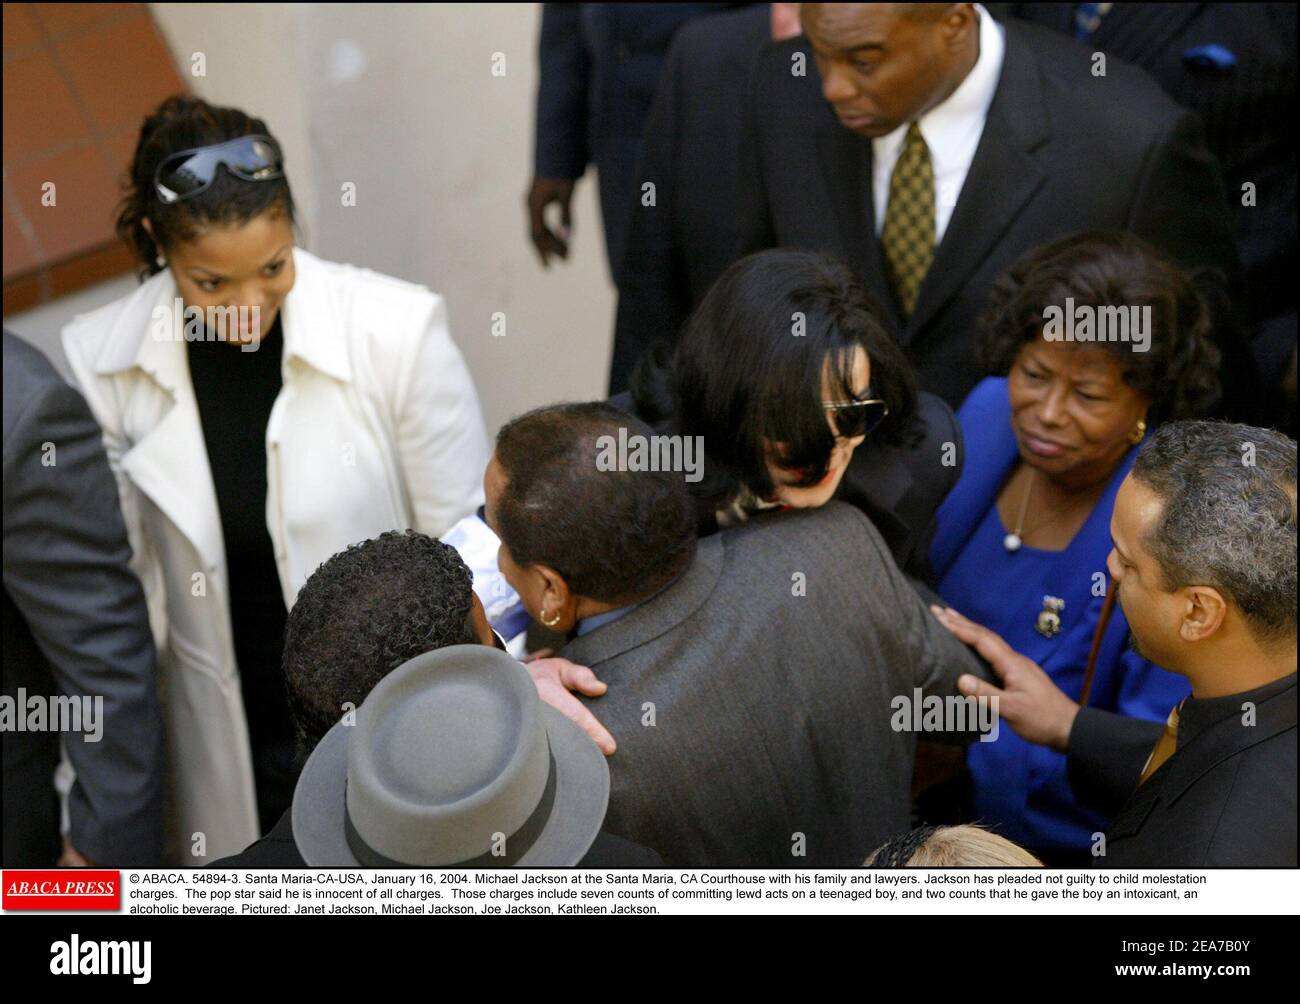 © ABACA. 54894-3. Santa Maria-CA-USA, January 16, 2004. Michael Jackson at the Santa Maria, CA Courthouse with his family and lawyers. Jackson has pleaded not guilty to child molestation charges. The pop star said he is innocent of all charges. Those charges include seven counts of committing lewd acts on a teenaged boy, and two counts that he gave the boy an intoxicant, an alcoholic beverage. Pictured: Janet Jackson, Michael Jackson, Joe Jackson, Kathleen Jackson. Stock Photo